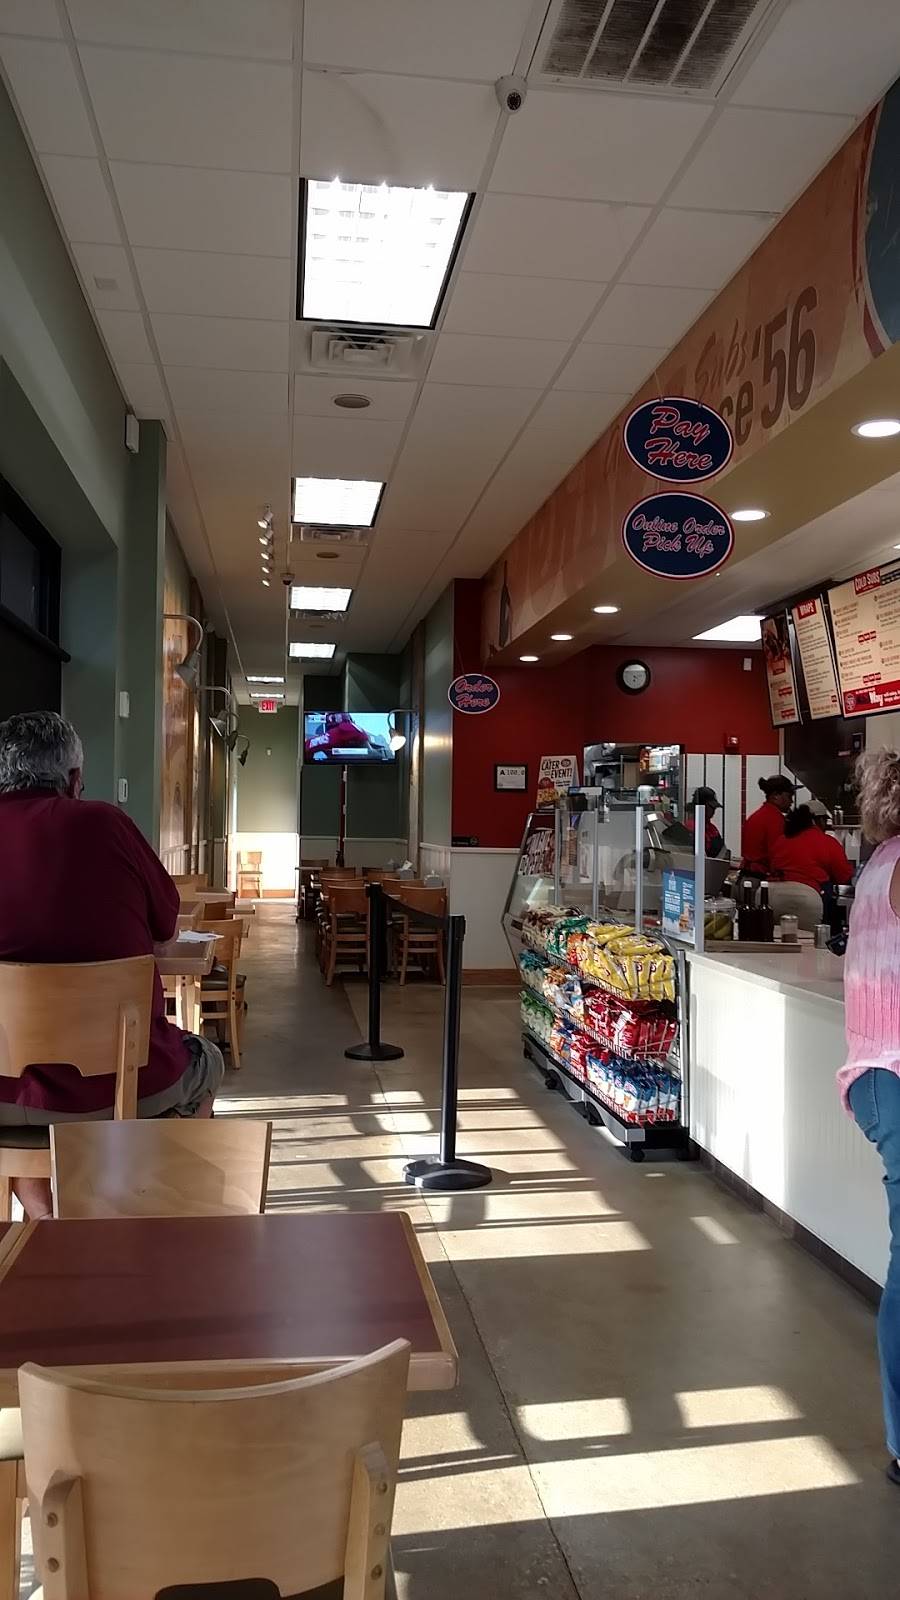 jersey mike's on raeford road